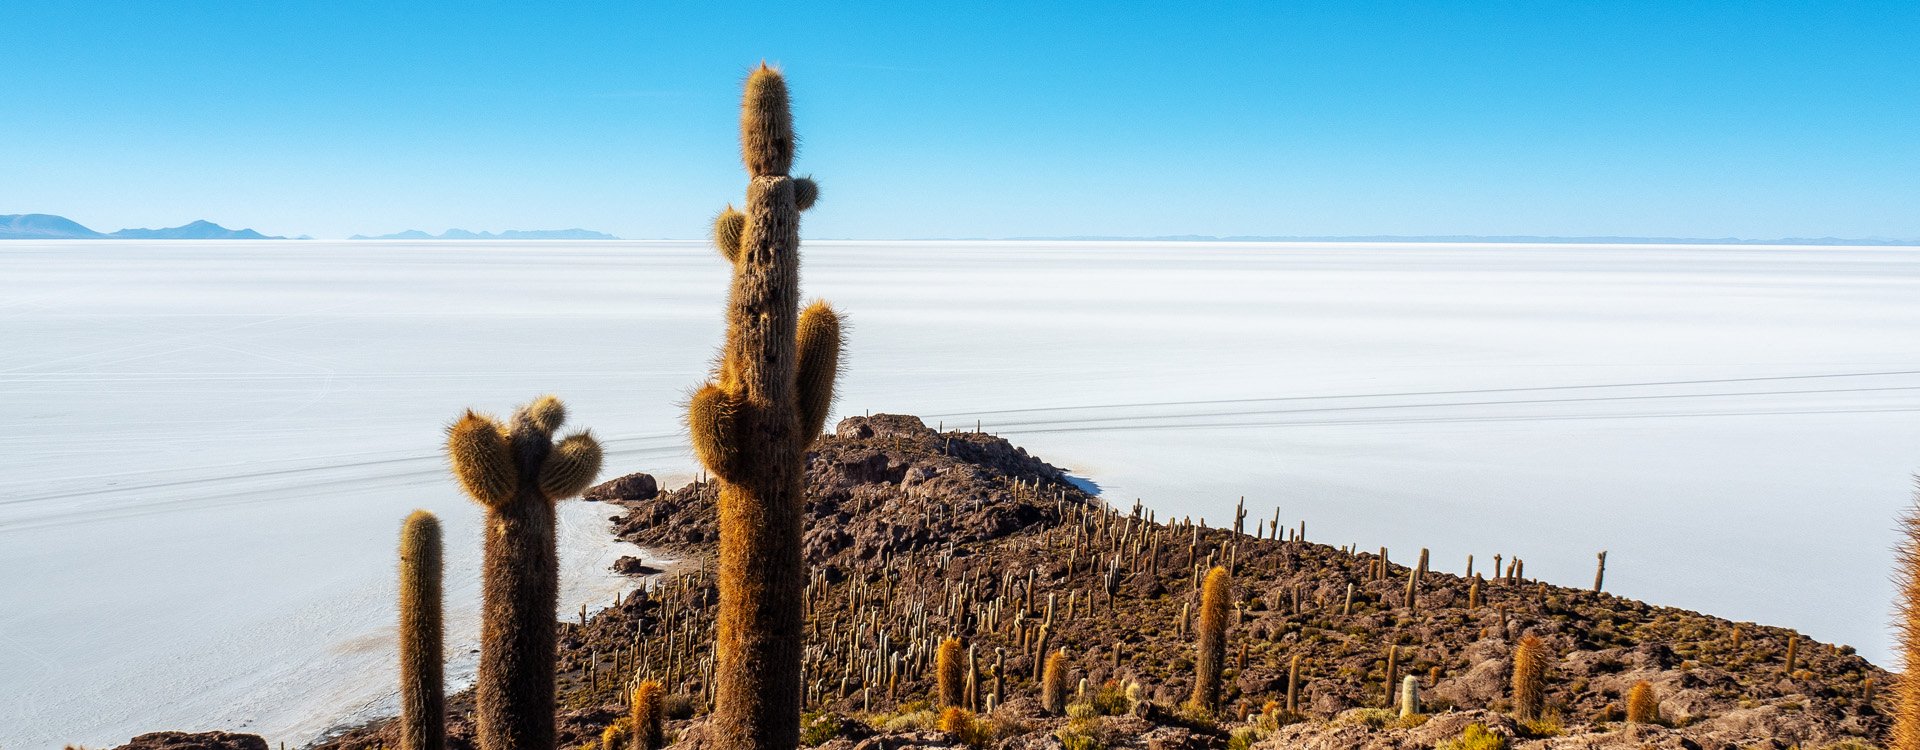 cactus in isla incahuasi, situated in the middle of Salar de Uyuni, the world's largest salt flat in Bolivia